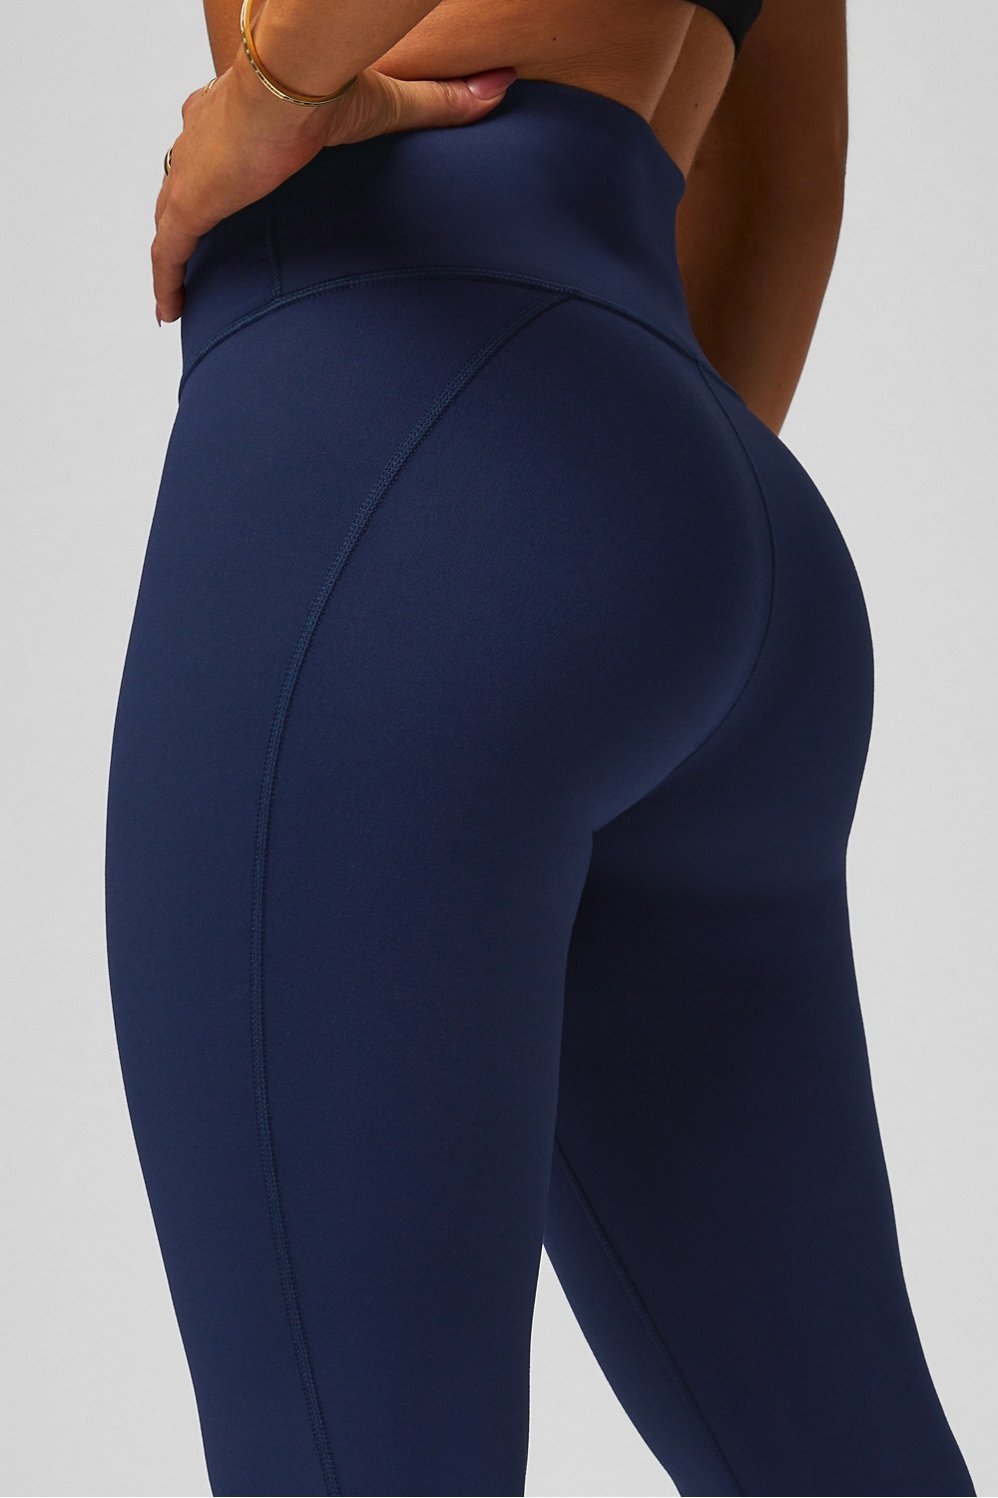 Fabletics High-Waisted Statement Powerhold Leggings Size S - $28